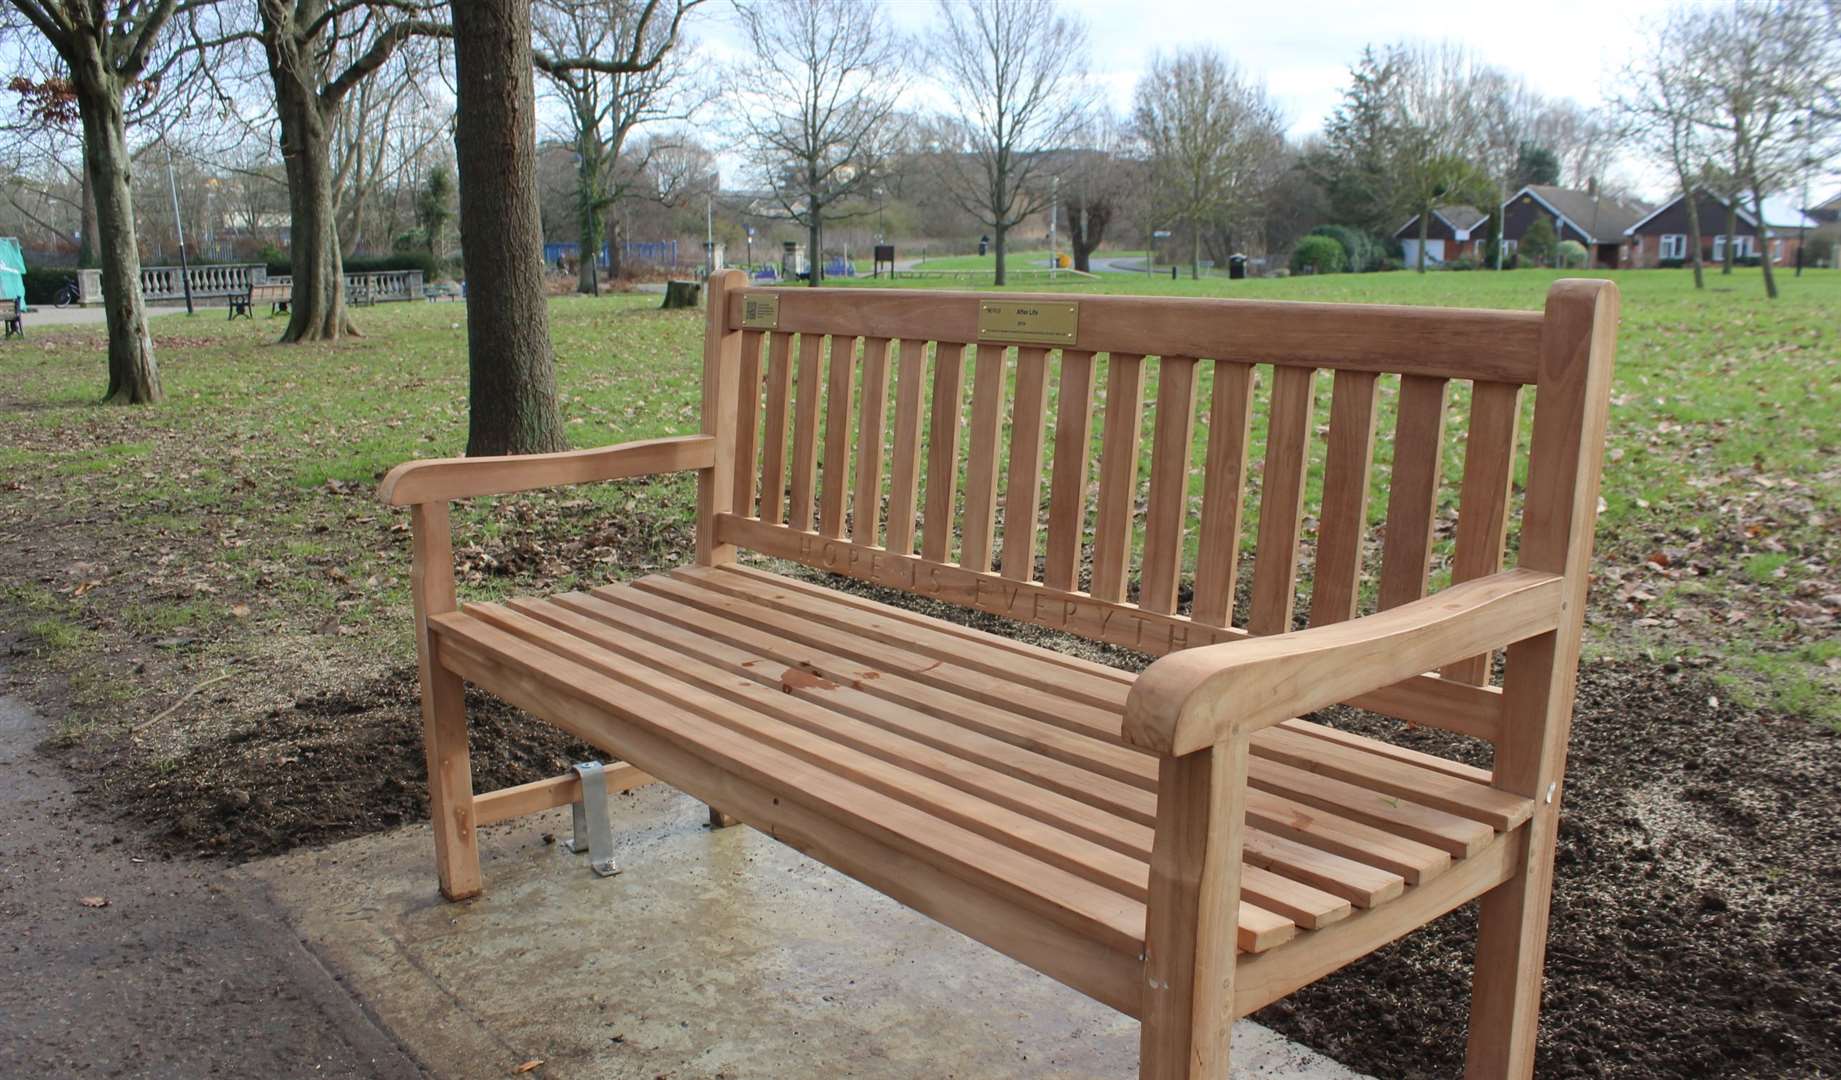 The seat was donated to Victoria Park by Netflix. Picture: ABC